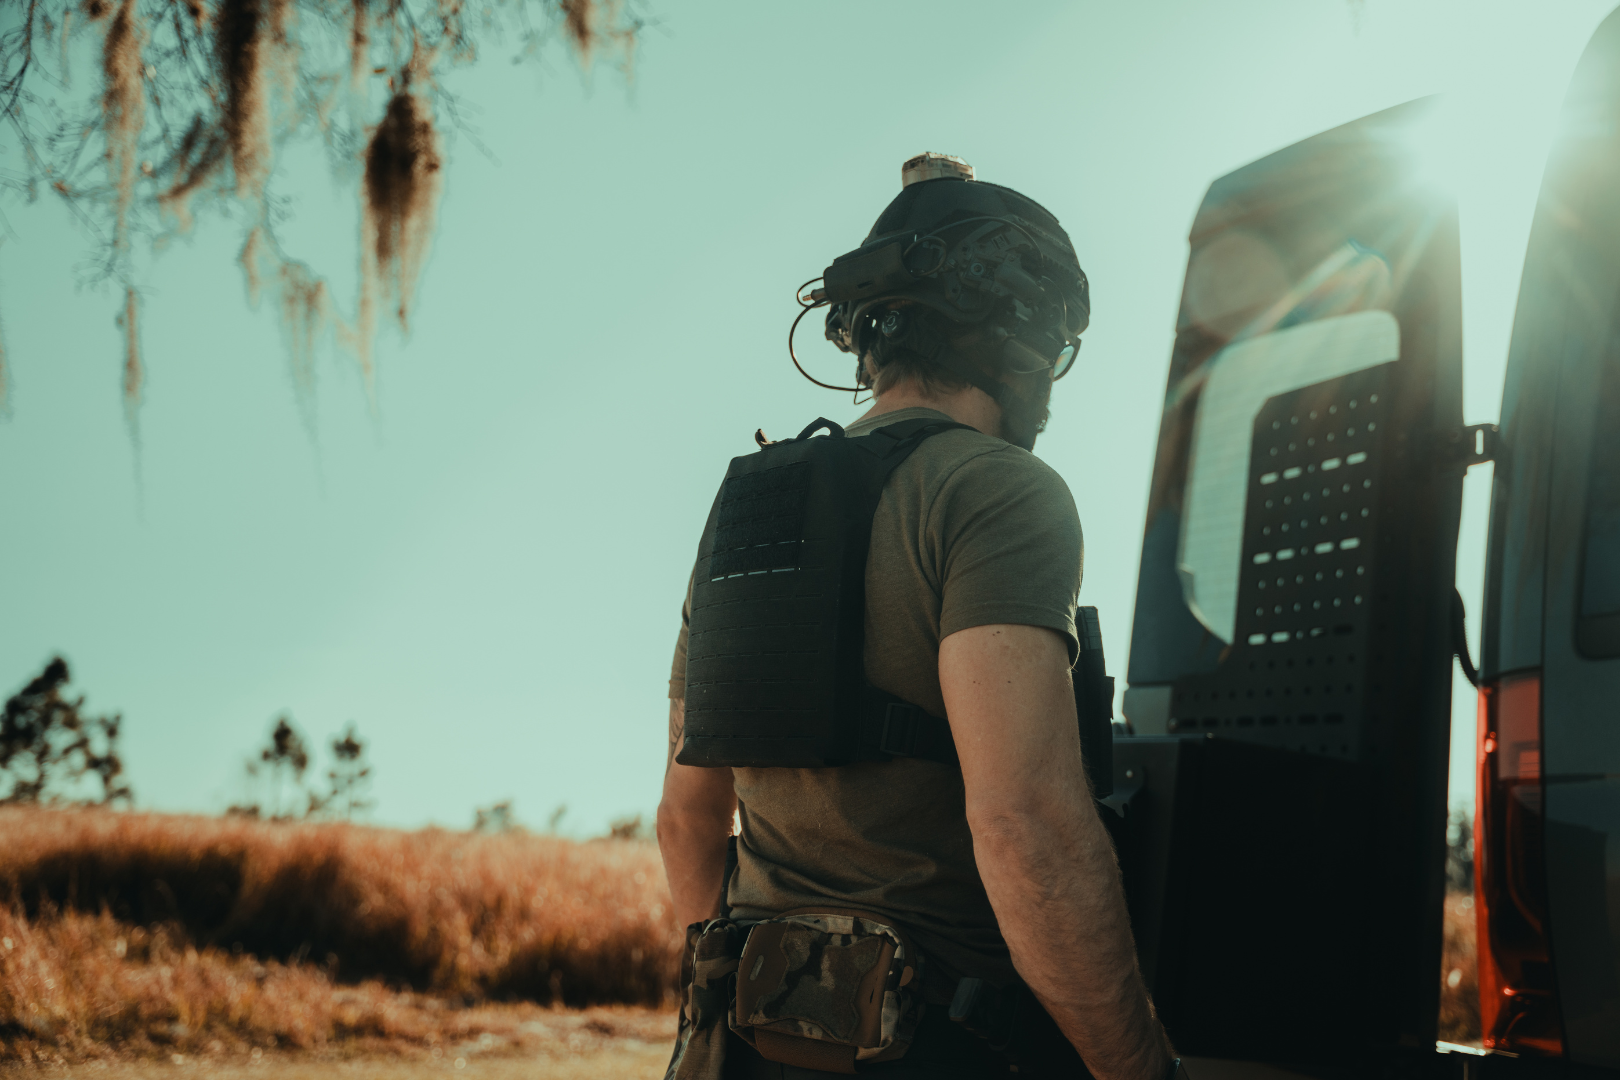 fortis level iv plate in plate carrier with molle and guy wearing body armor helmet